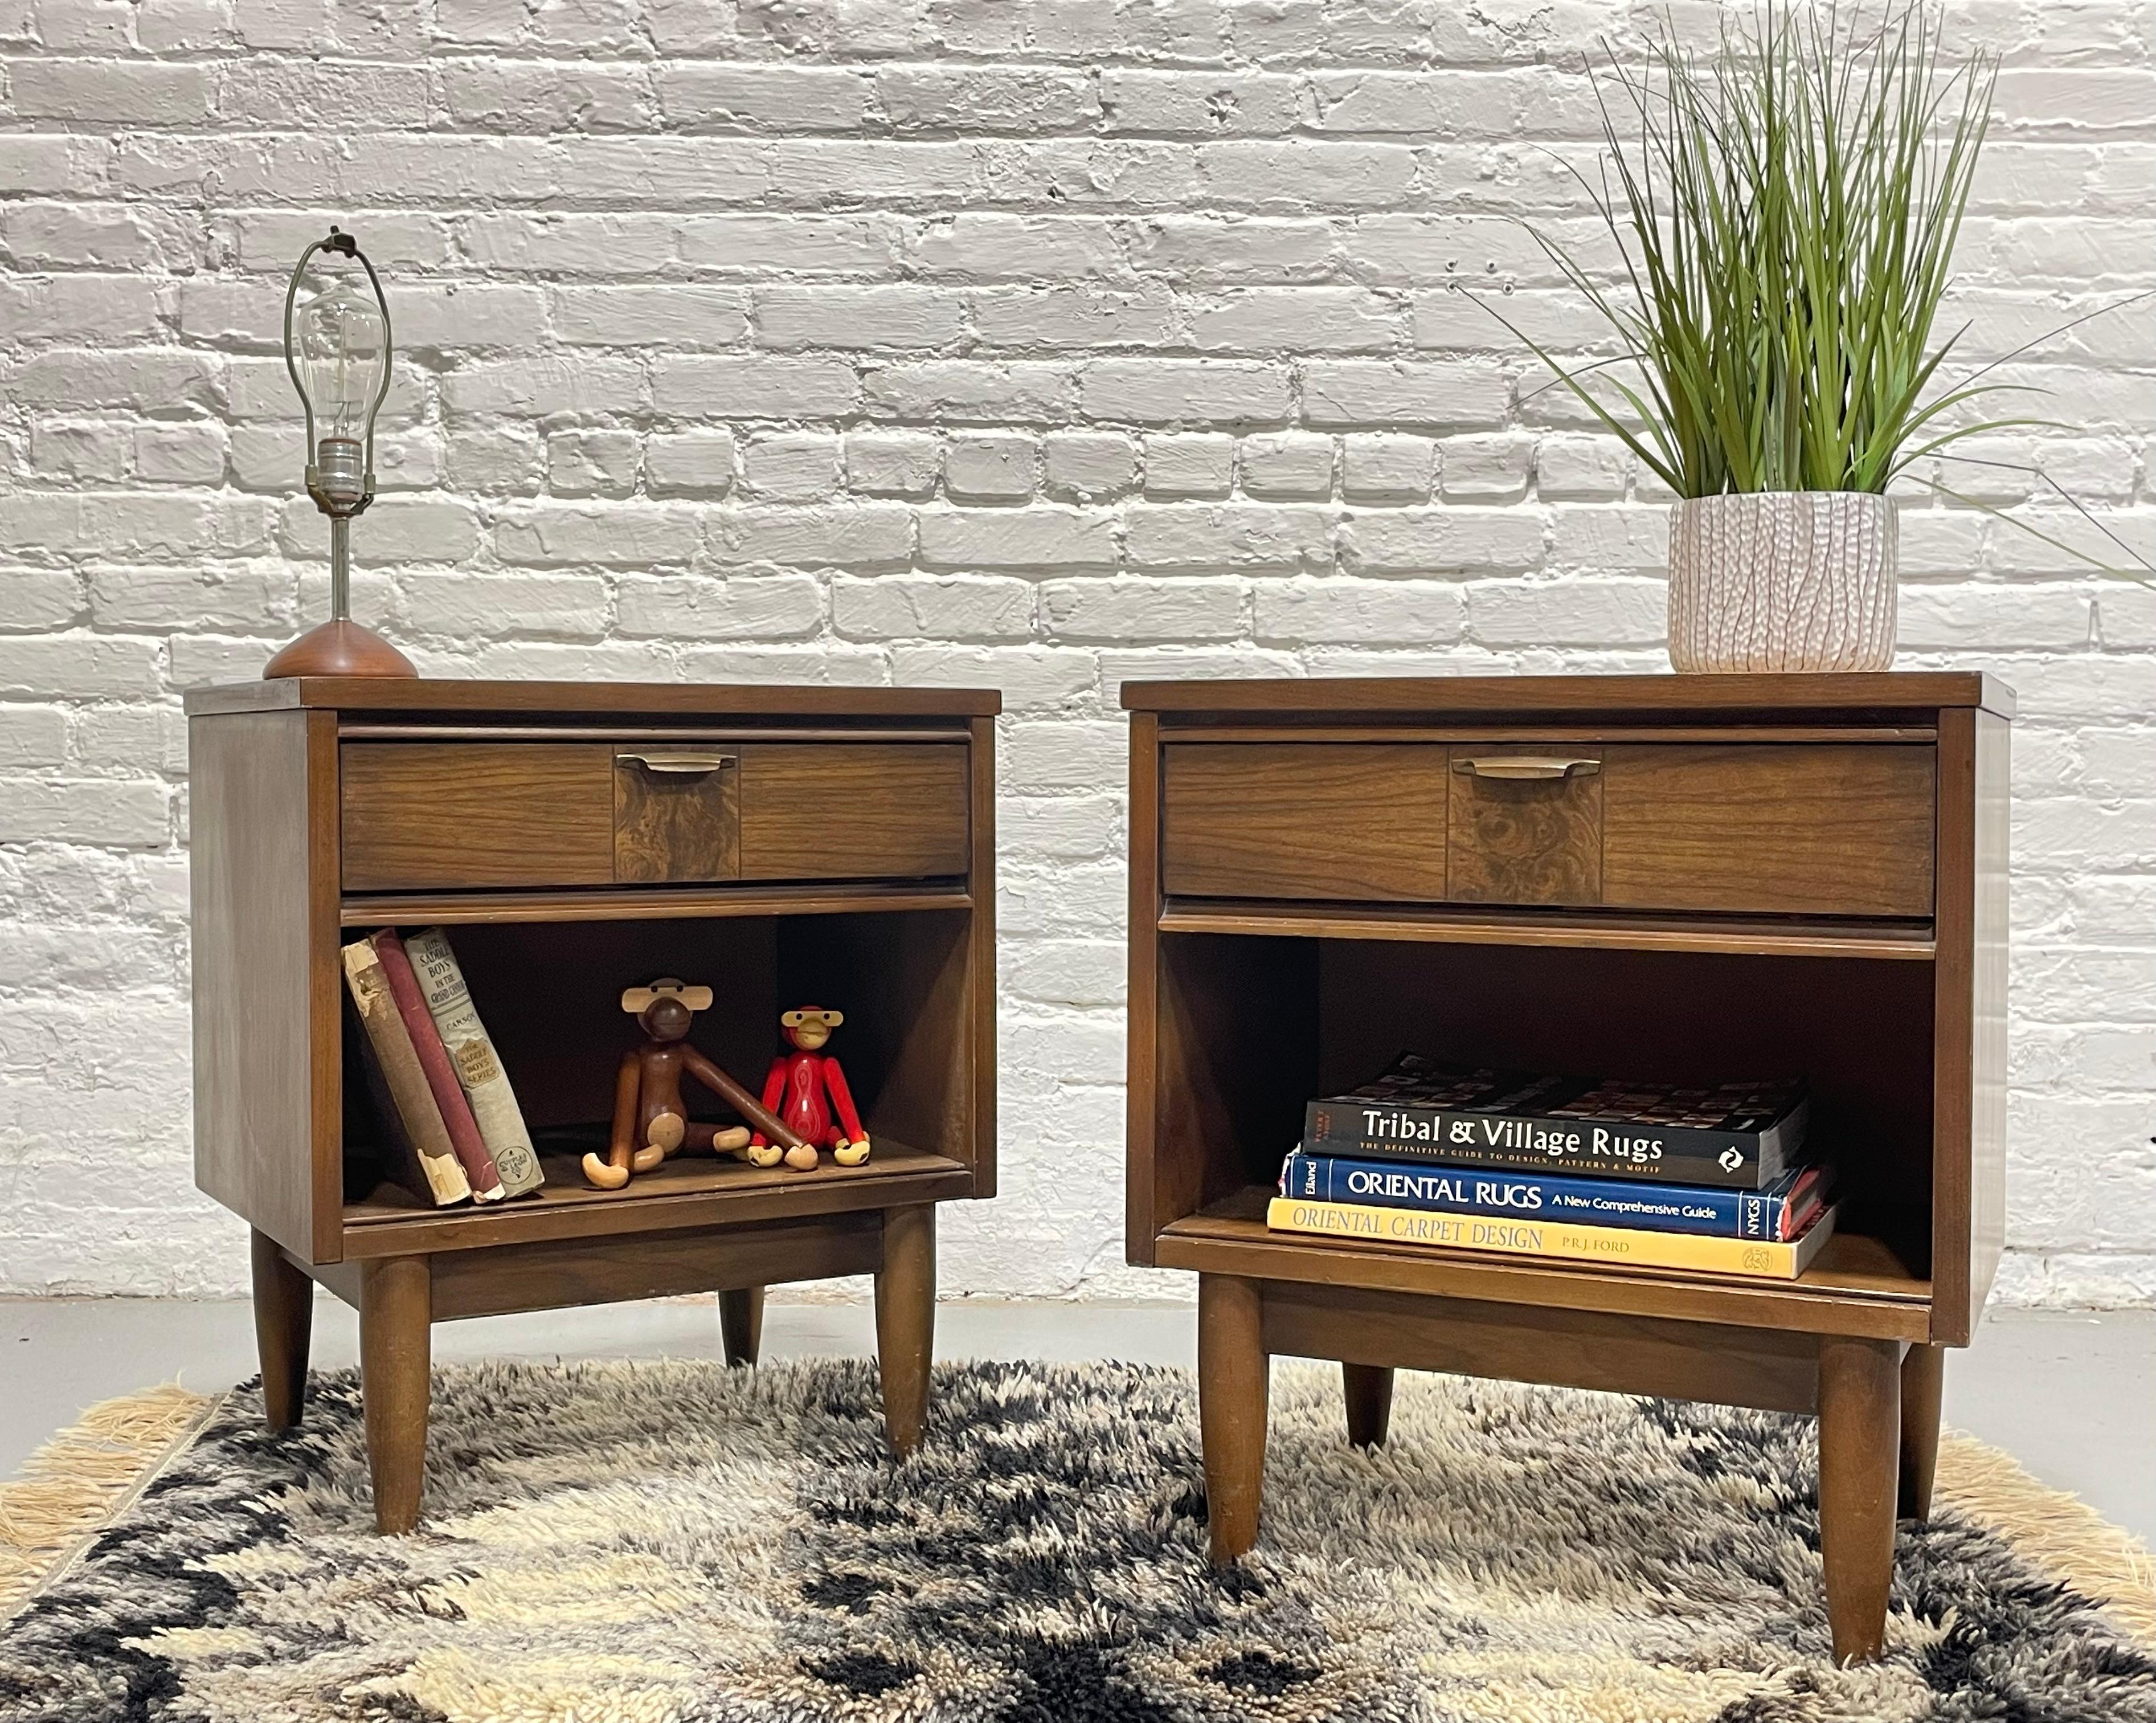 Pair of Mid Century Modern Walnut Nightstands, c. 1960's. This lovely pair offers a single dovetailed drawer and open area below, perfect for your bedtime essentials as well as showcasing design objects or books below. The drawer front features a